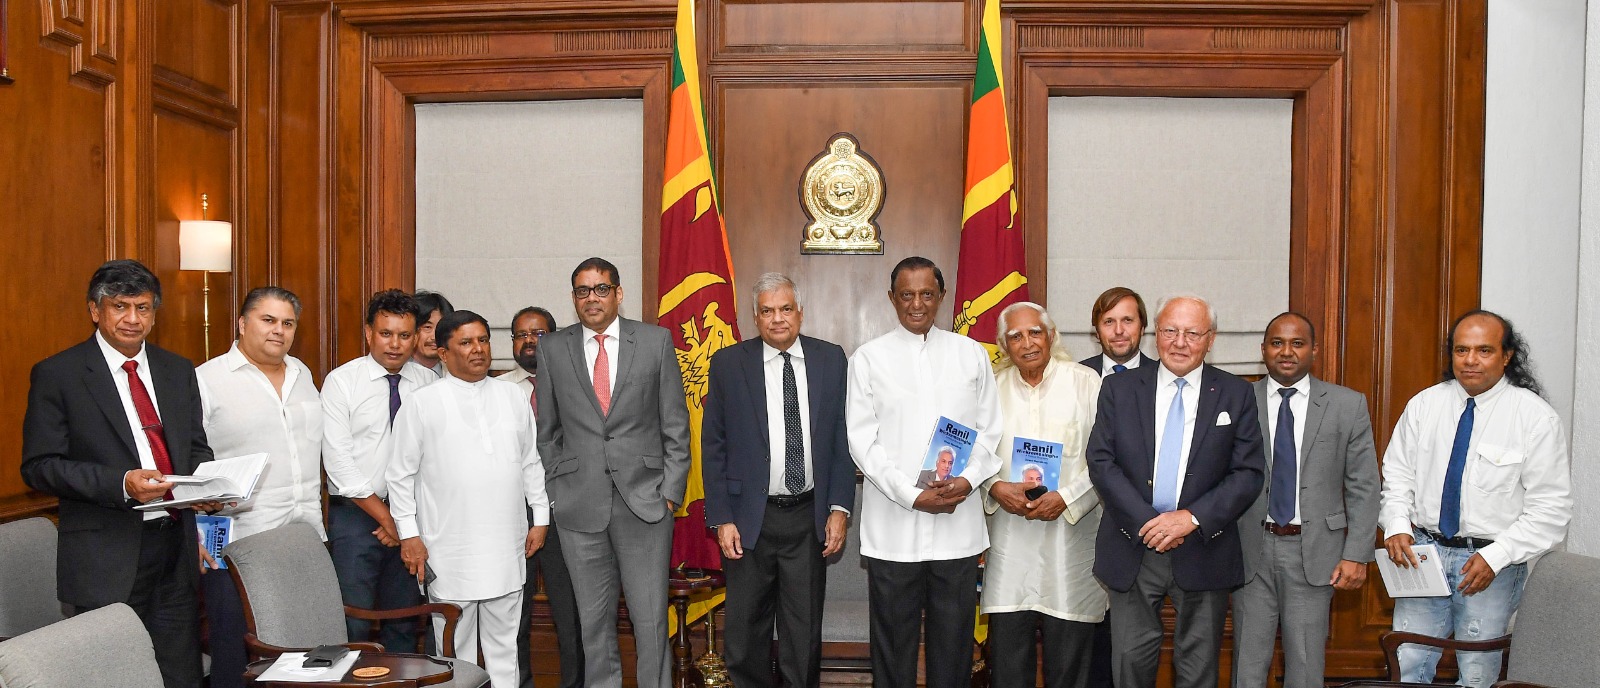 The third edition of “Ranil Wickremesinghe, A Political Biography” presented to the President